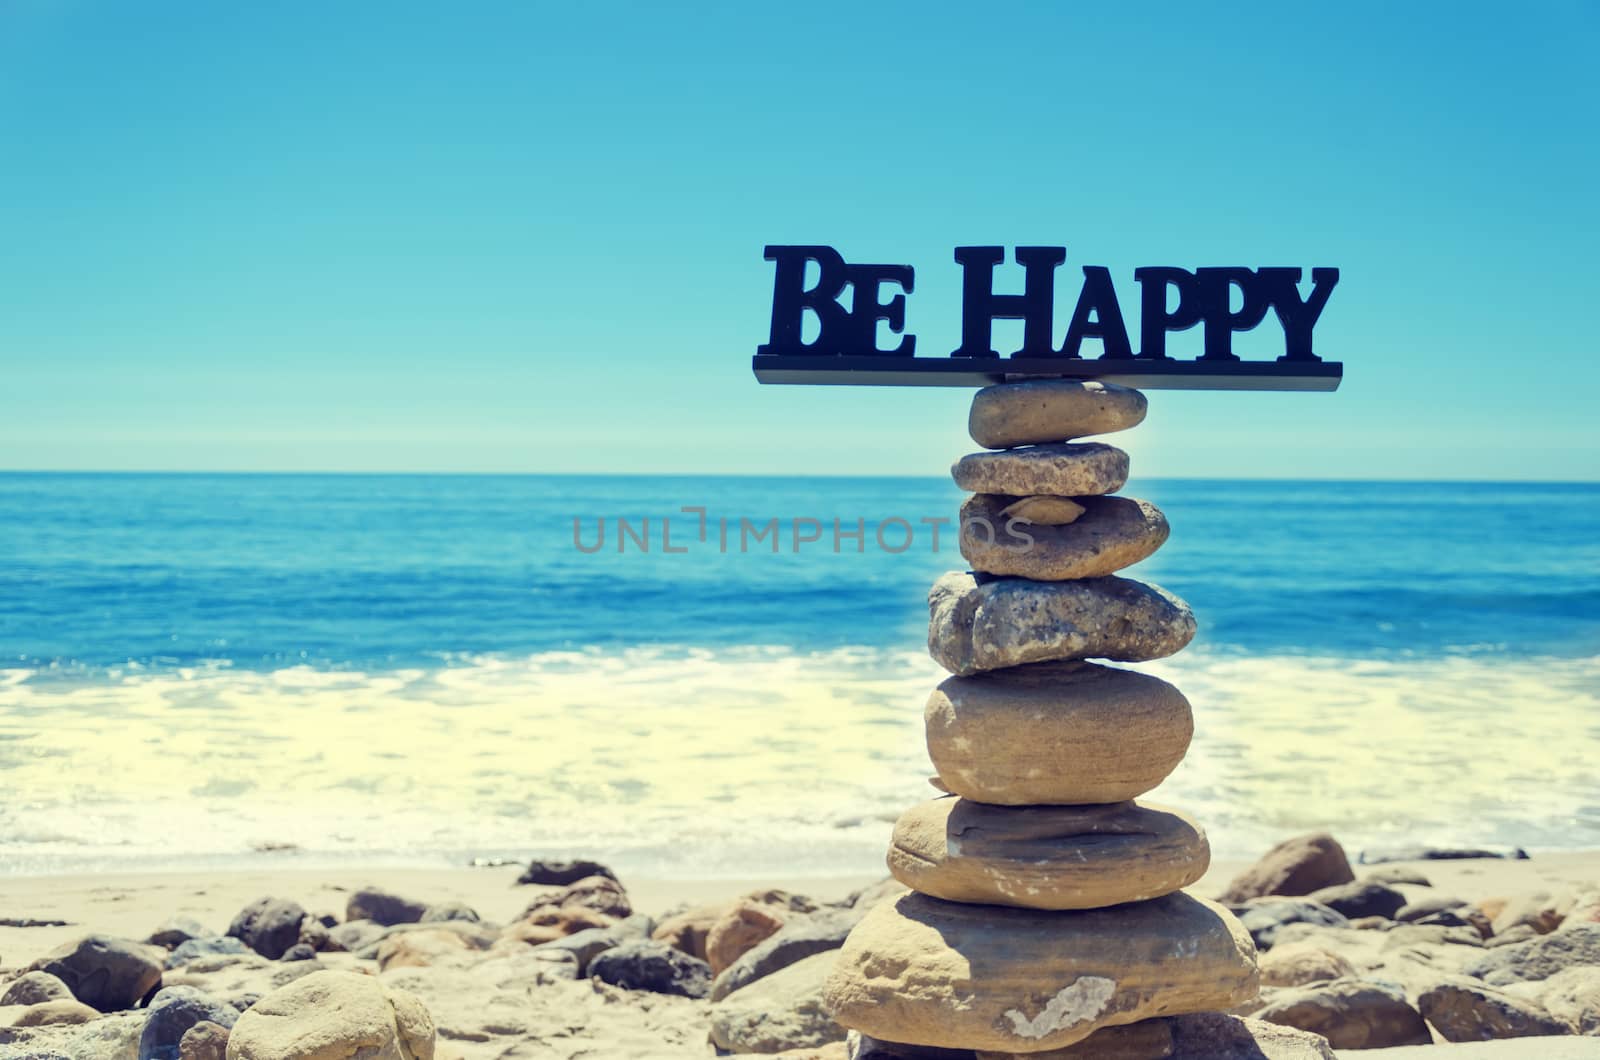 Sign "Be happy" on the top of rocks balancing by Pacific ocean - vintage